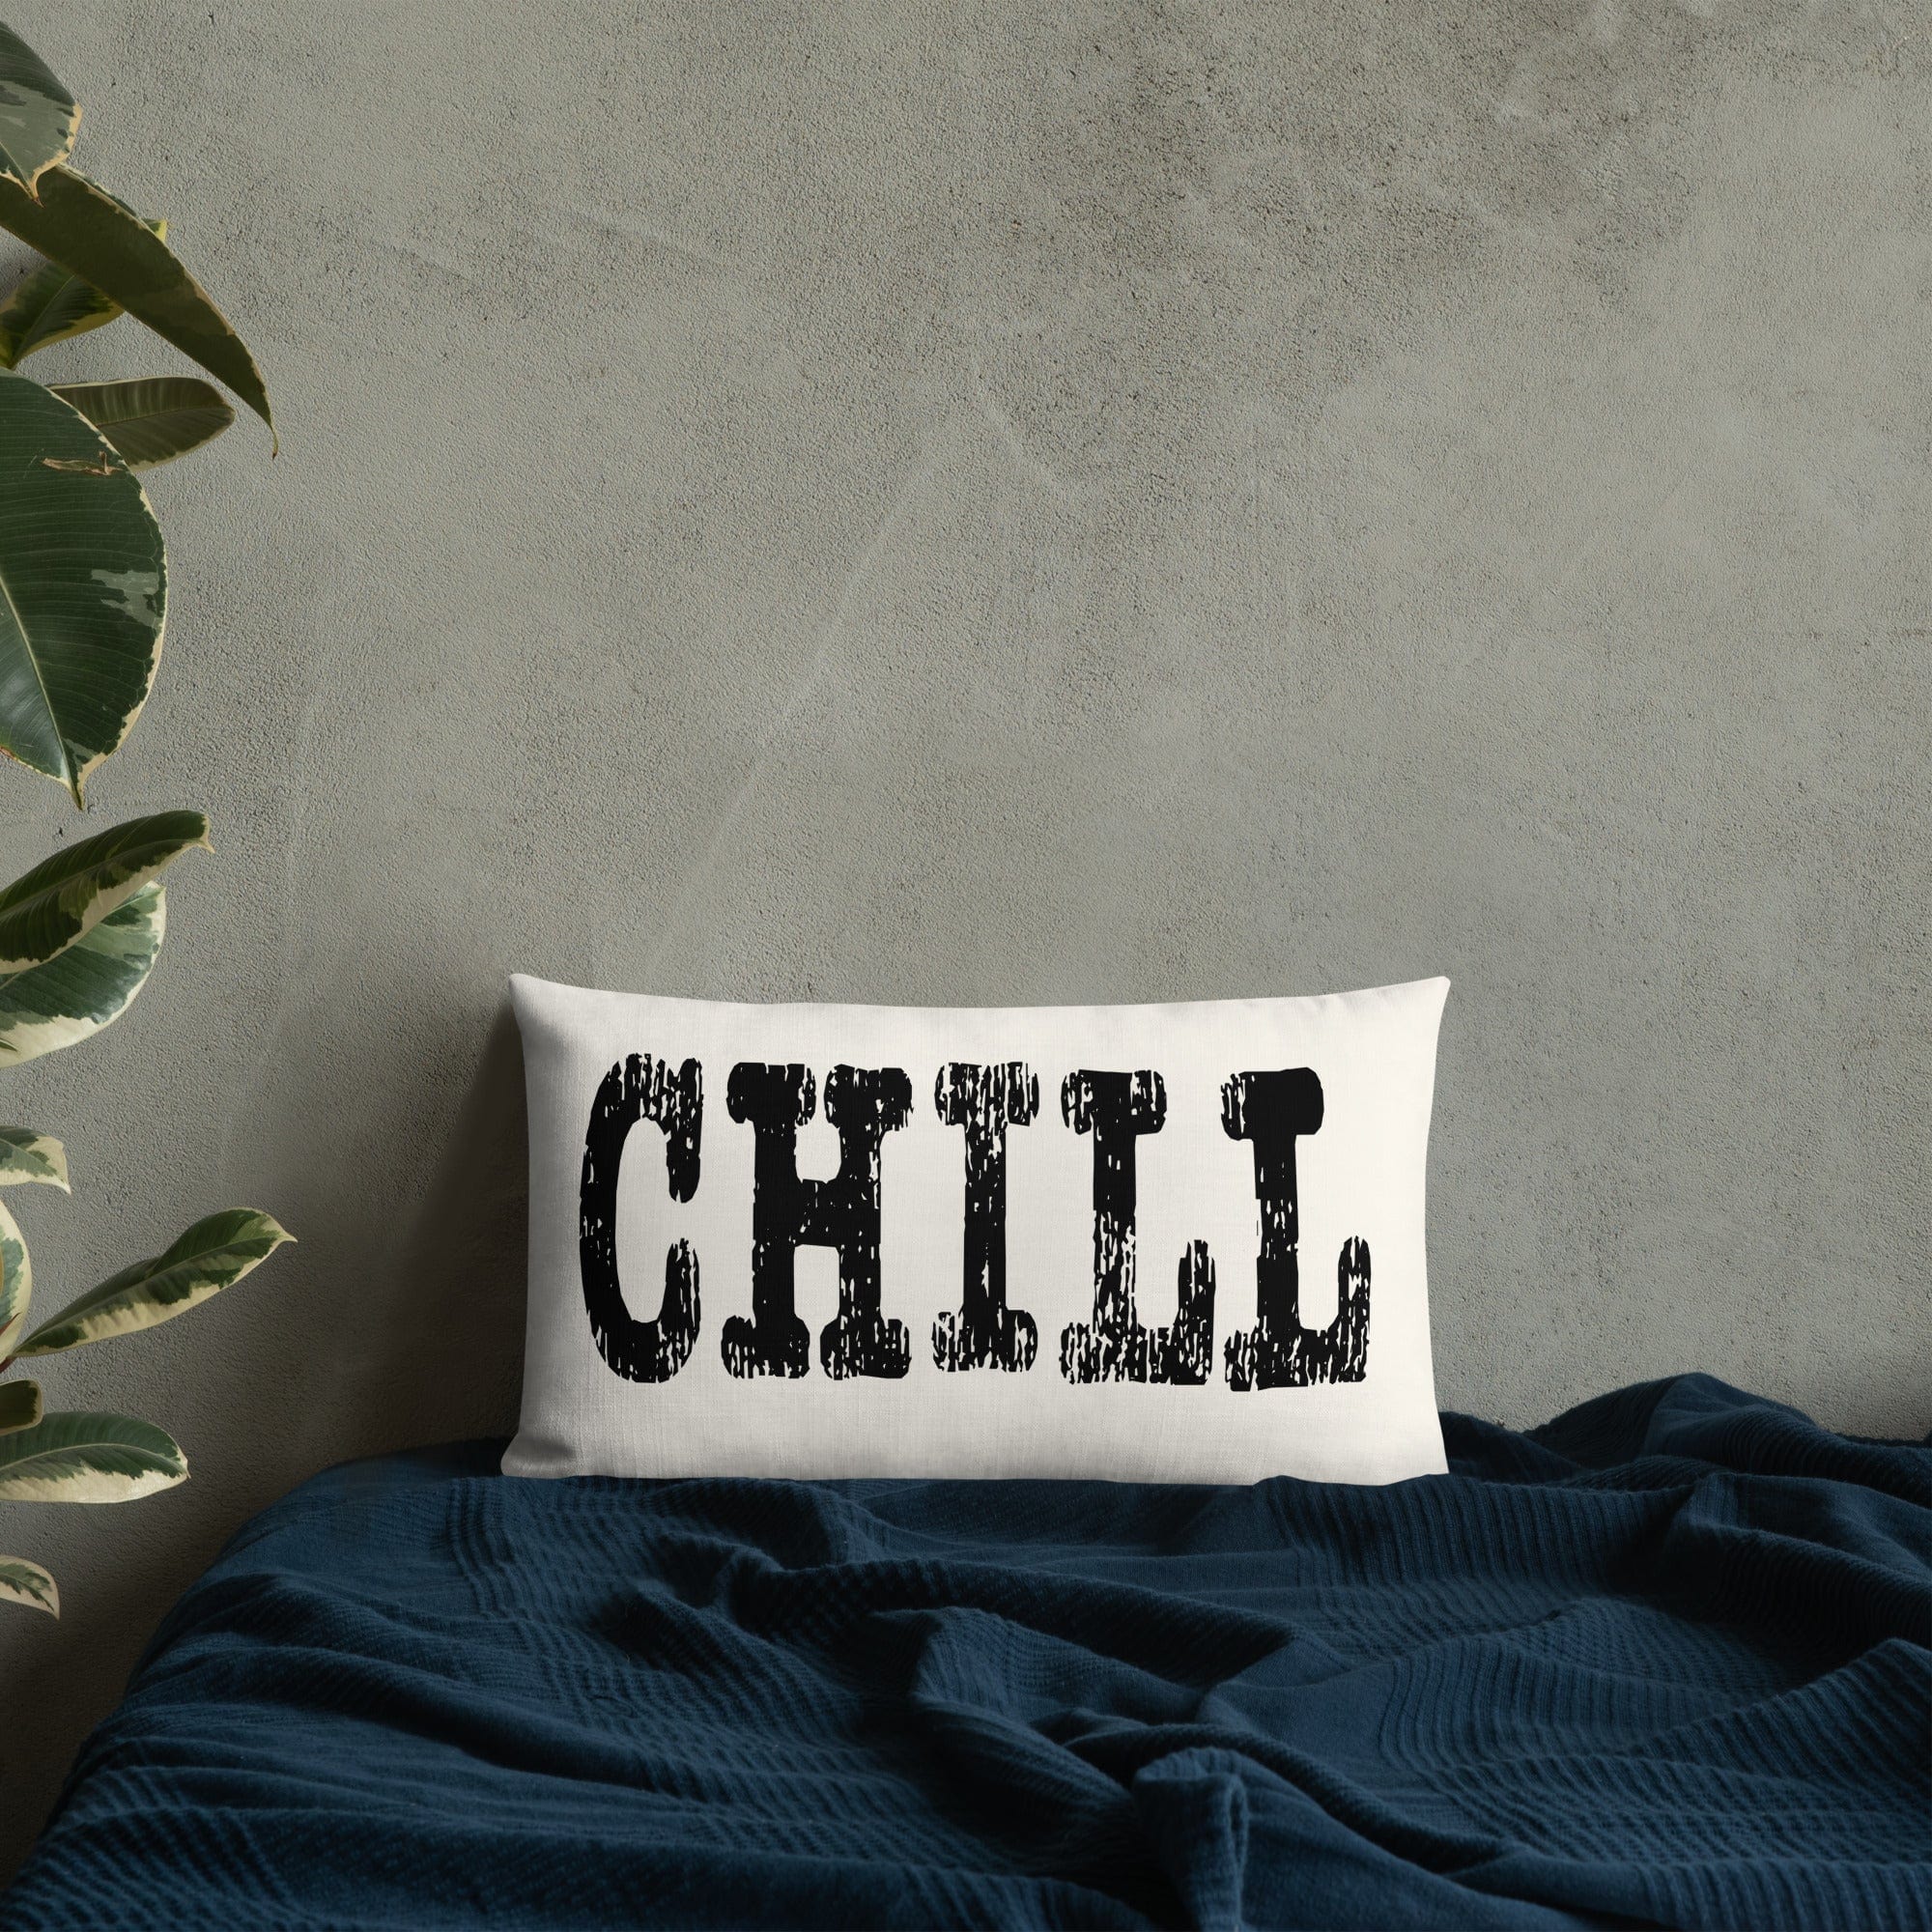 CHILL Inspirational Quote Decorative Throw Pillow Accent Cushion Throw Pillows A Moment Of Now Women’s Boutique Clothing Online Lifestyle Store